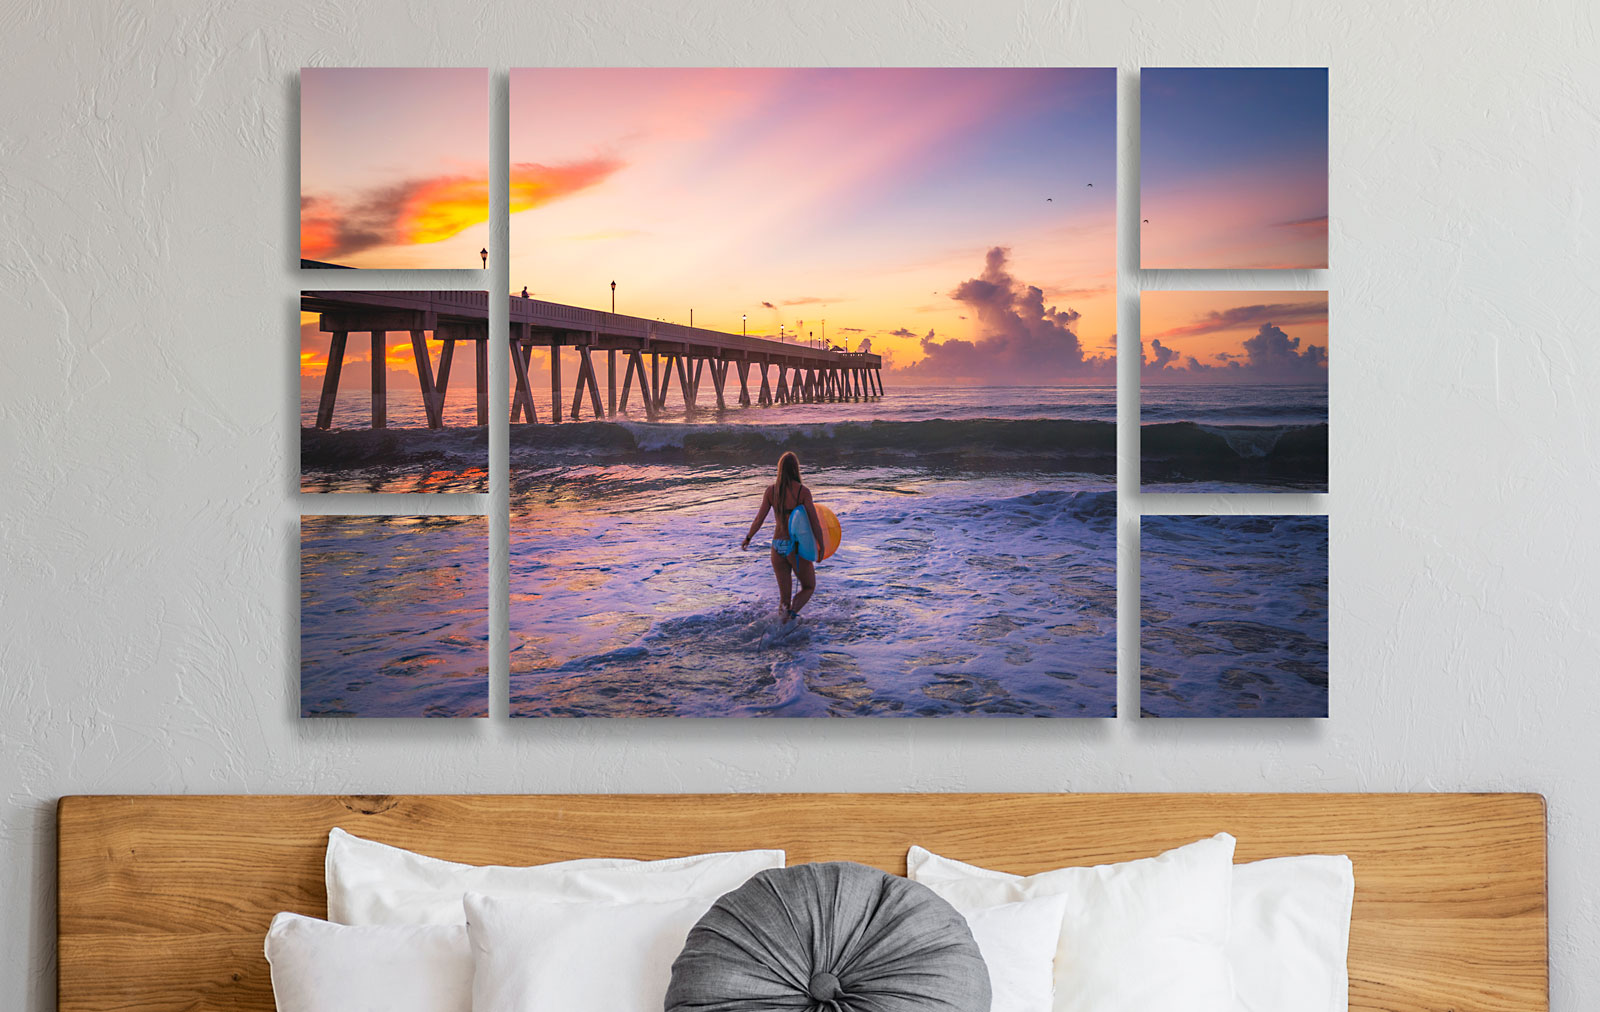 Wall Clusters & Splits - Wall Displays Featuring Your Images on Acrylic Prints